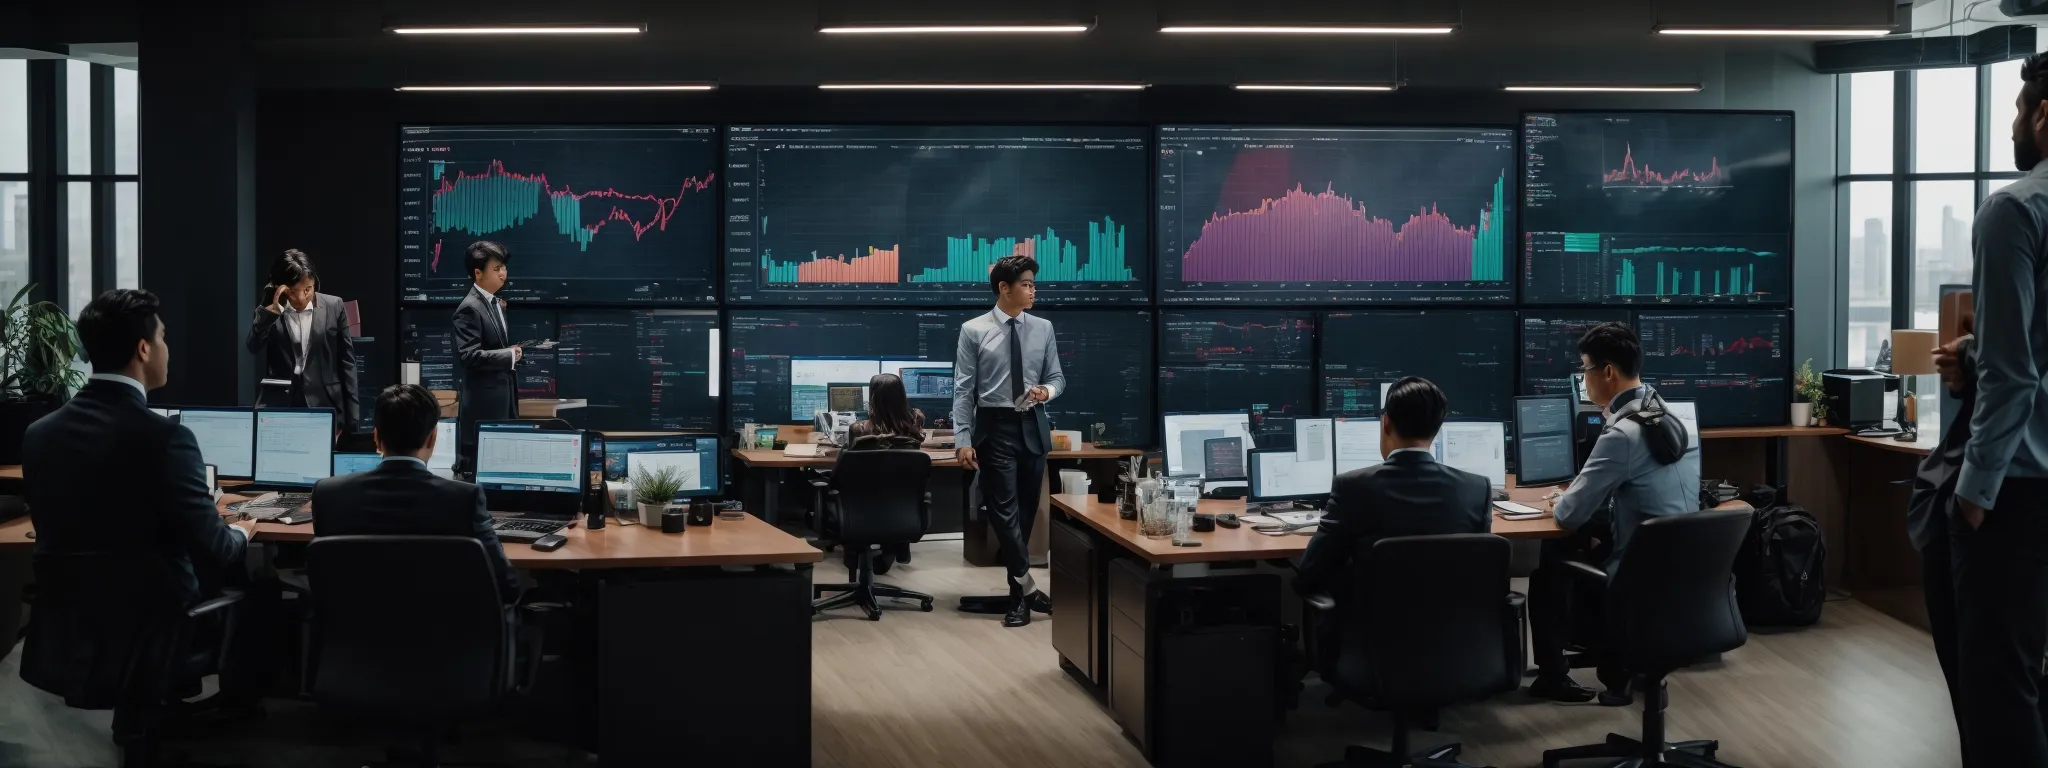 a team in a modern office intently focuses on large screens displaying colorful graphs and analytics dashboards while engaging in a strategic meeting.